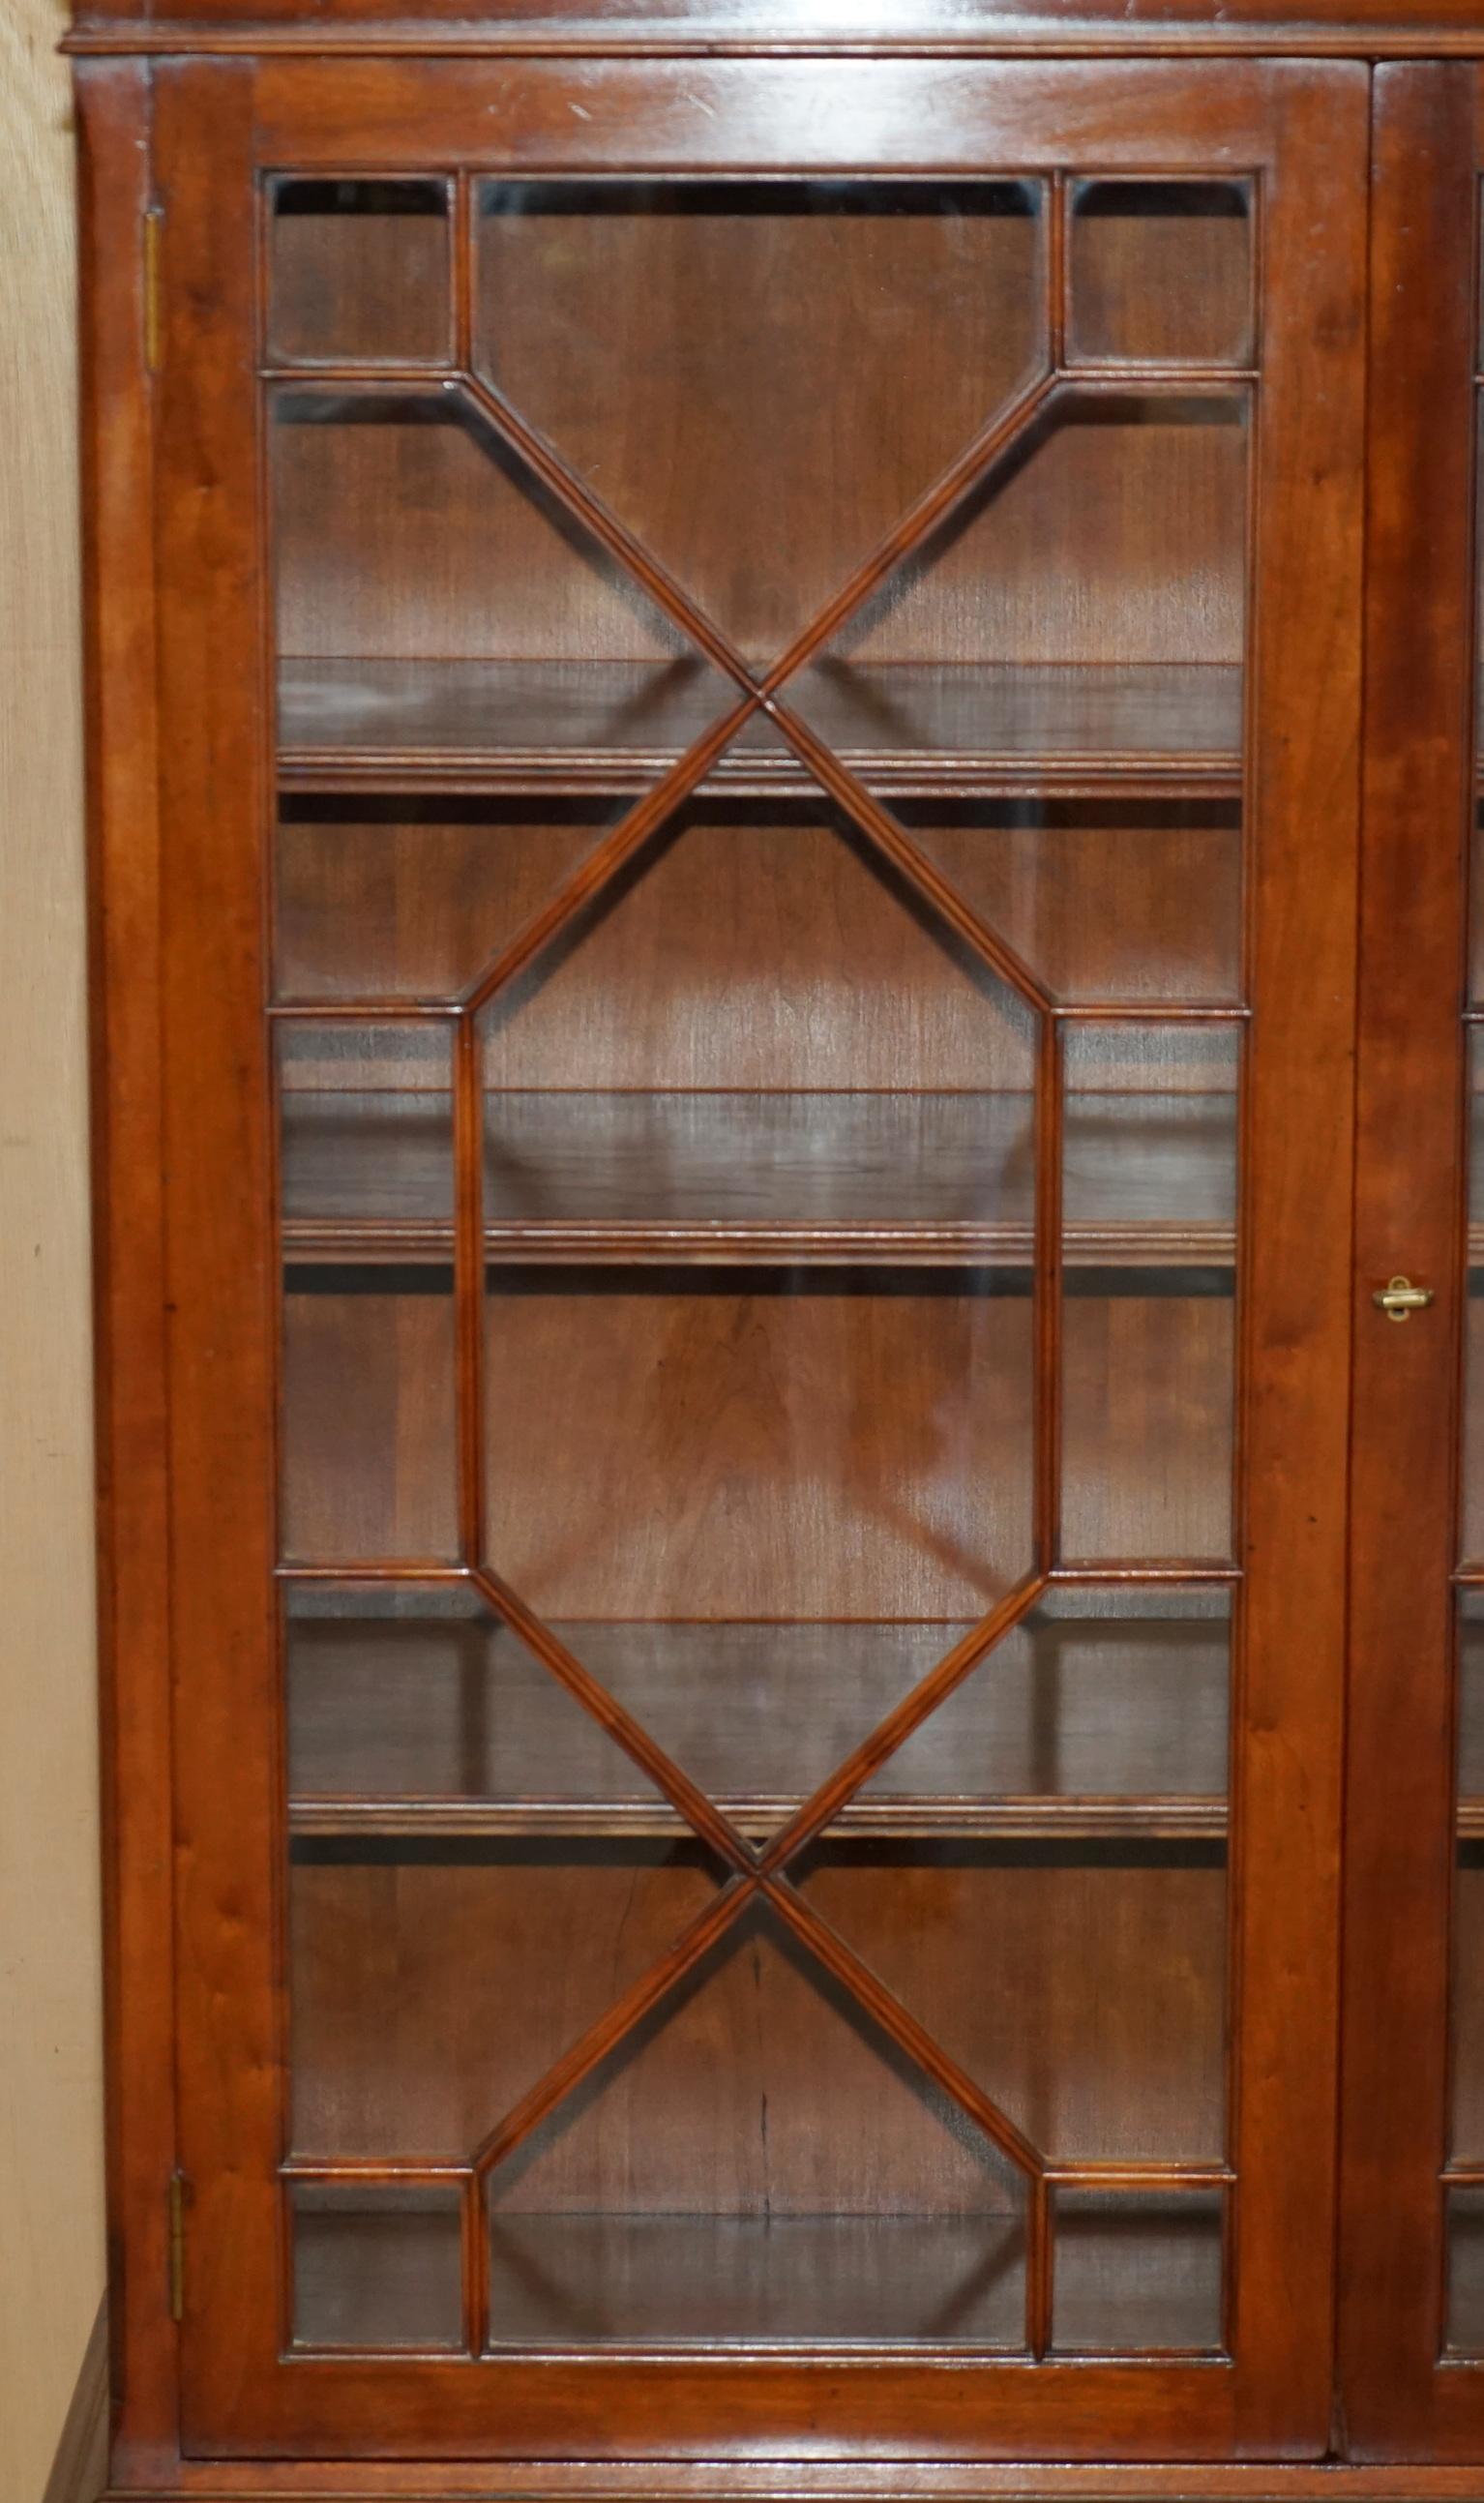 Hand-Crafted HARRODS LONDON REH KENNEDY ASTRAL GLAZED LiBRARY BOOKCASE CUPBOARD STORAGE UNIT For Sale